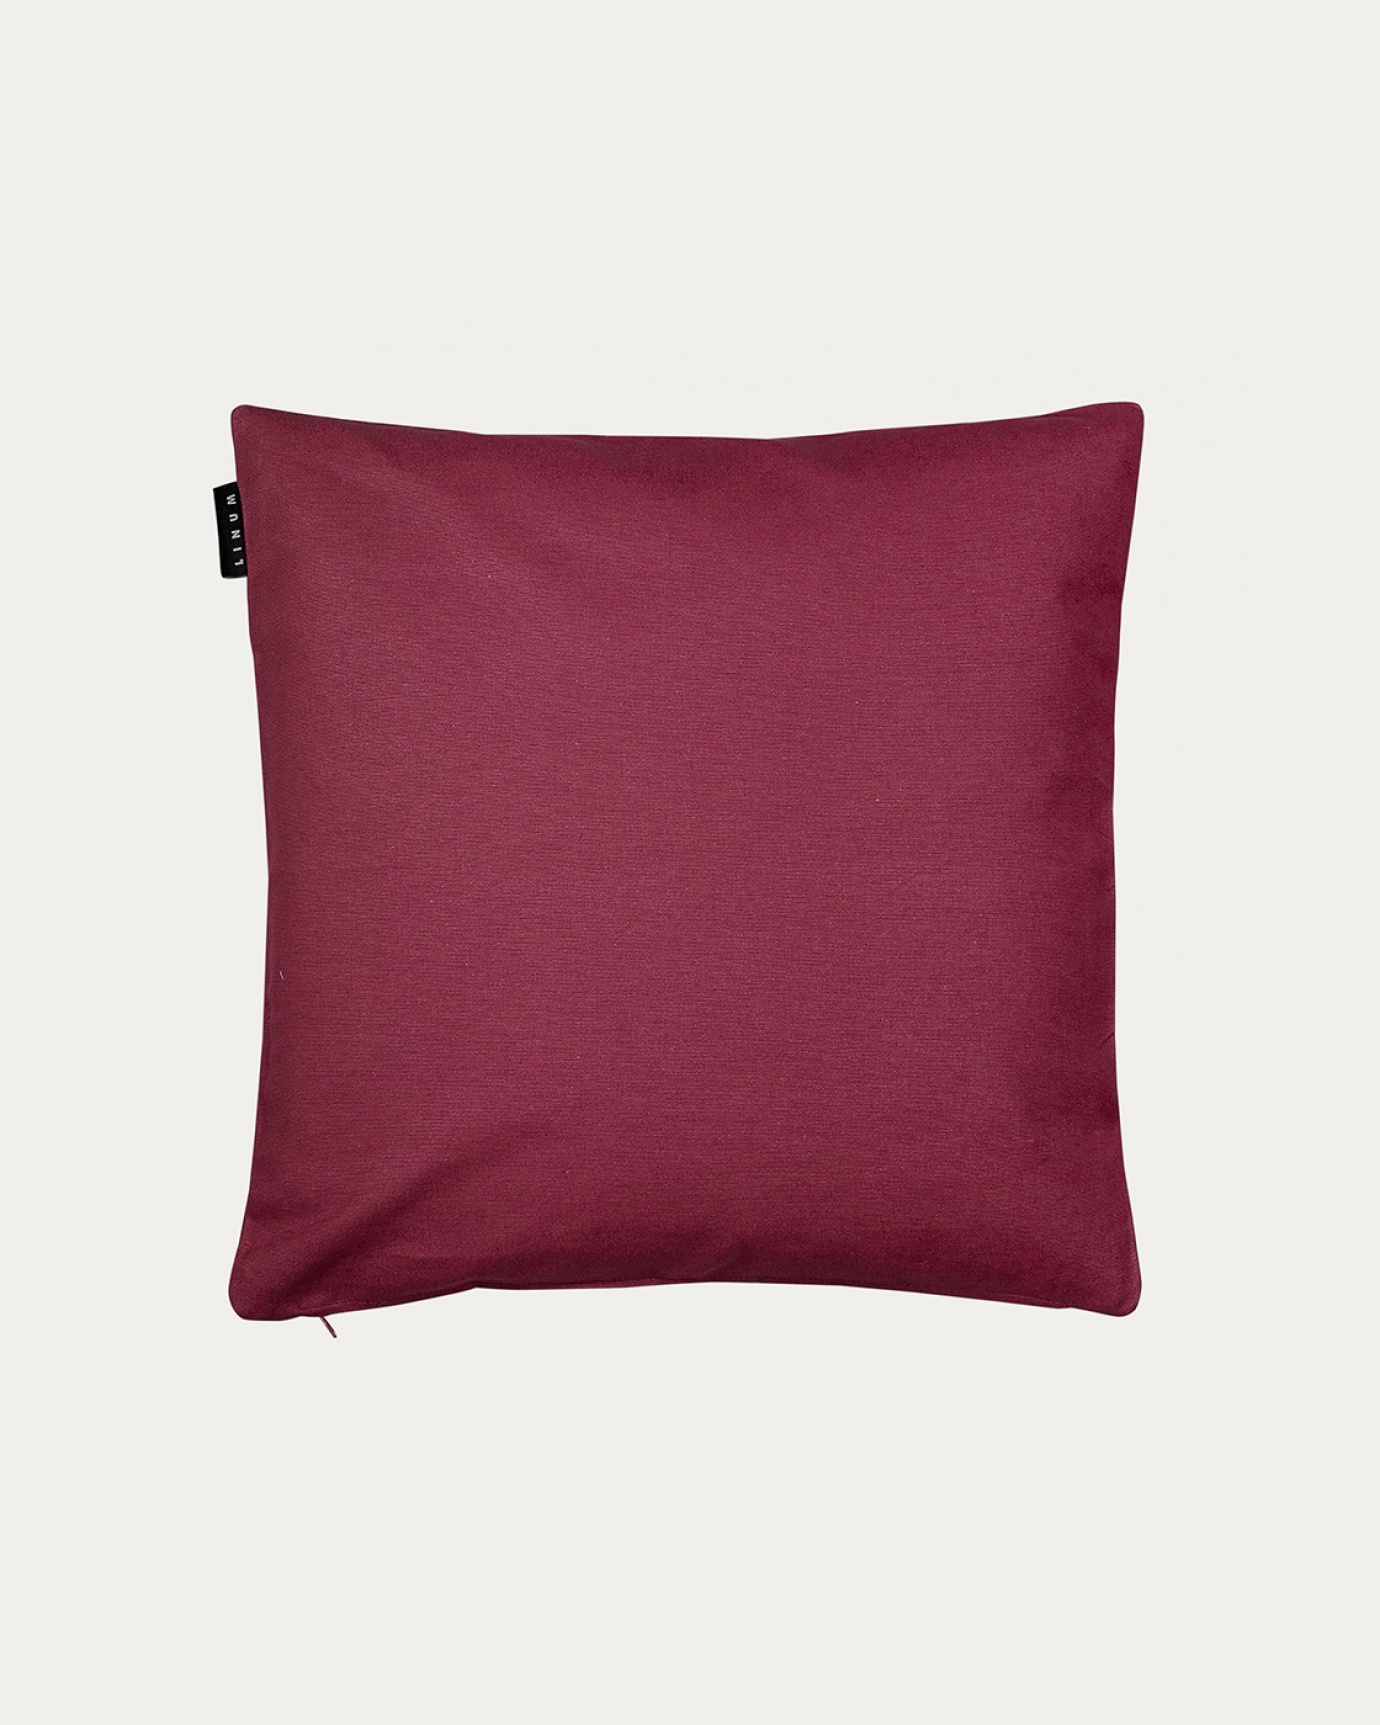 Product image pale wine red ANNABELL cushion cover made of soft cotton from LINUM DESIGN. Size 40x40 cm.